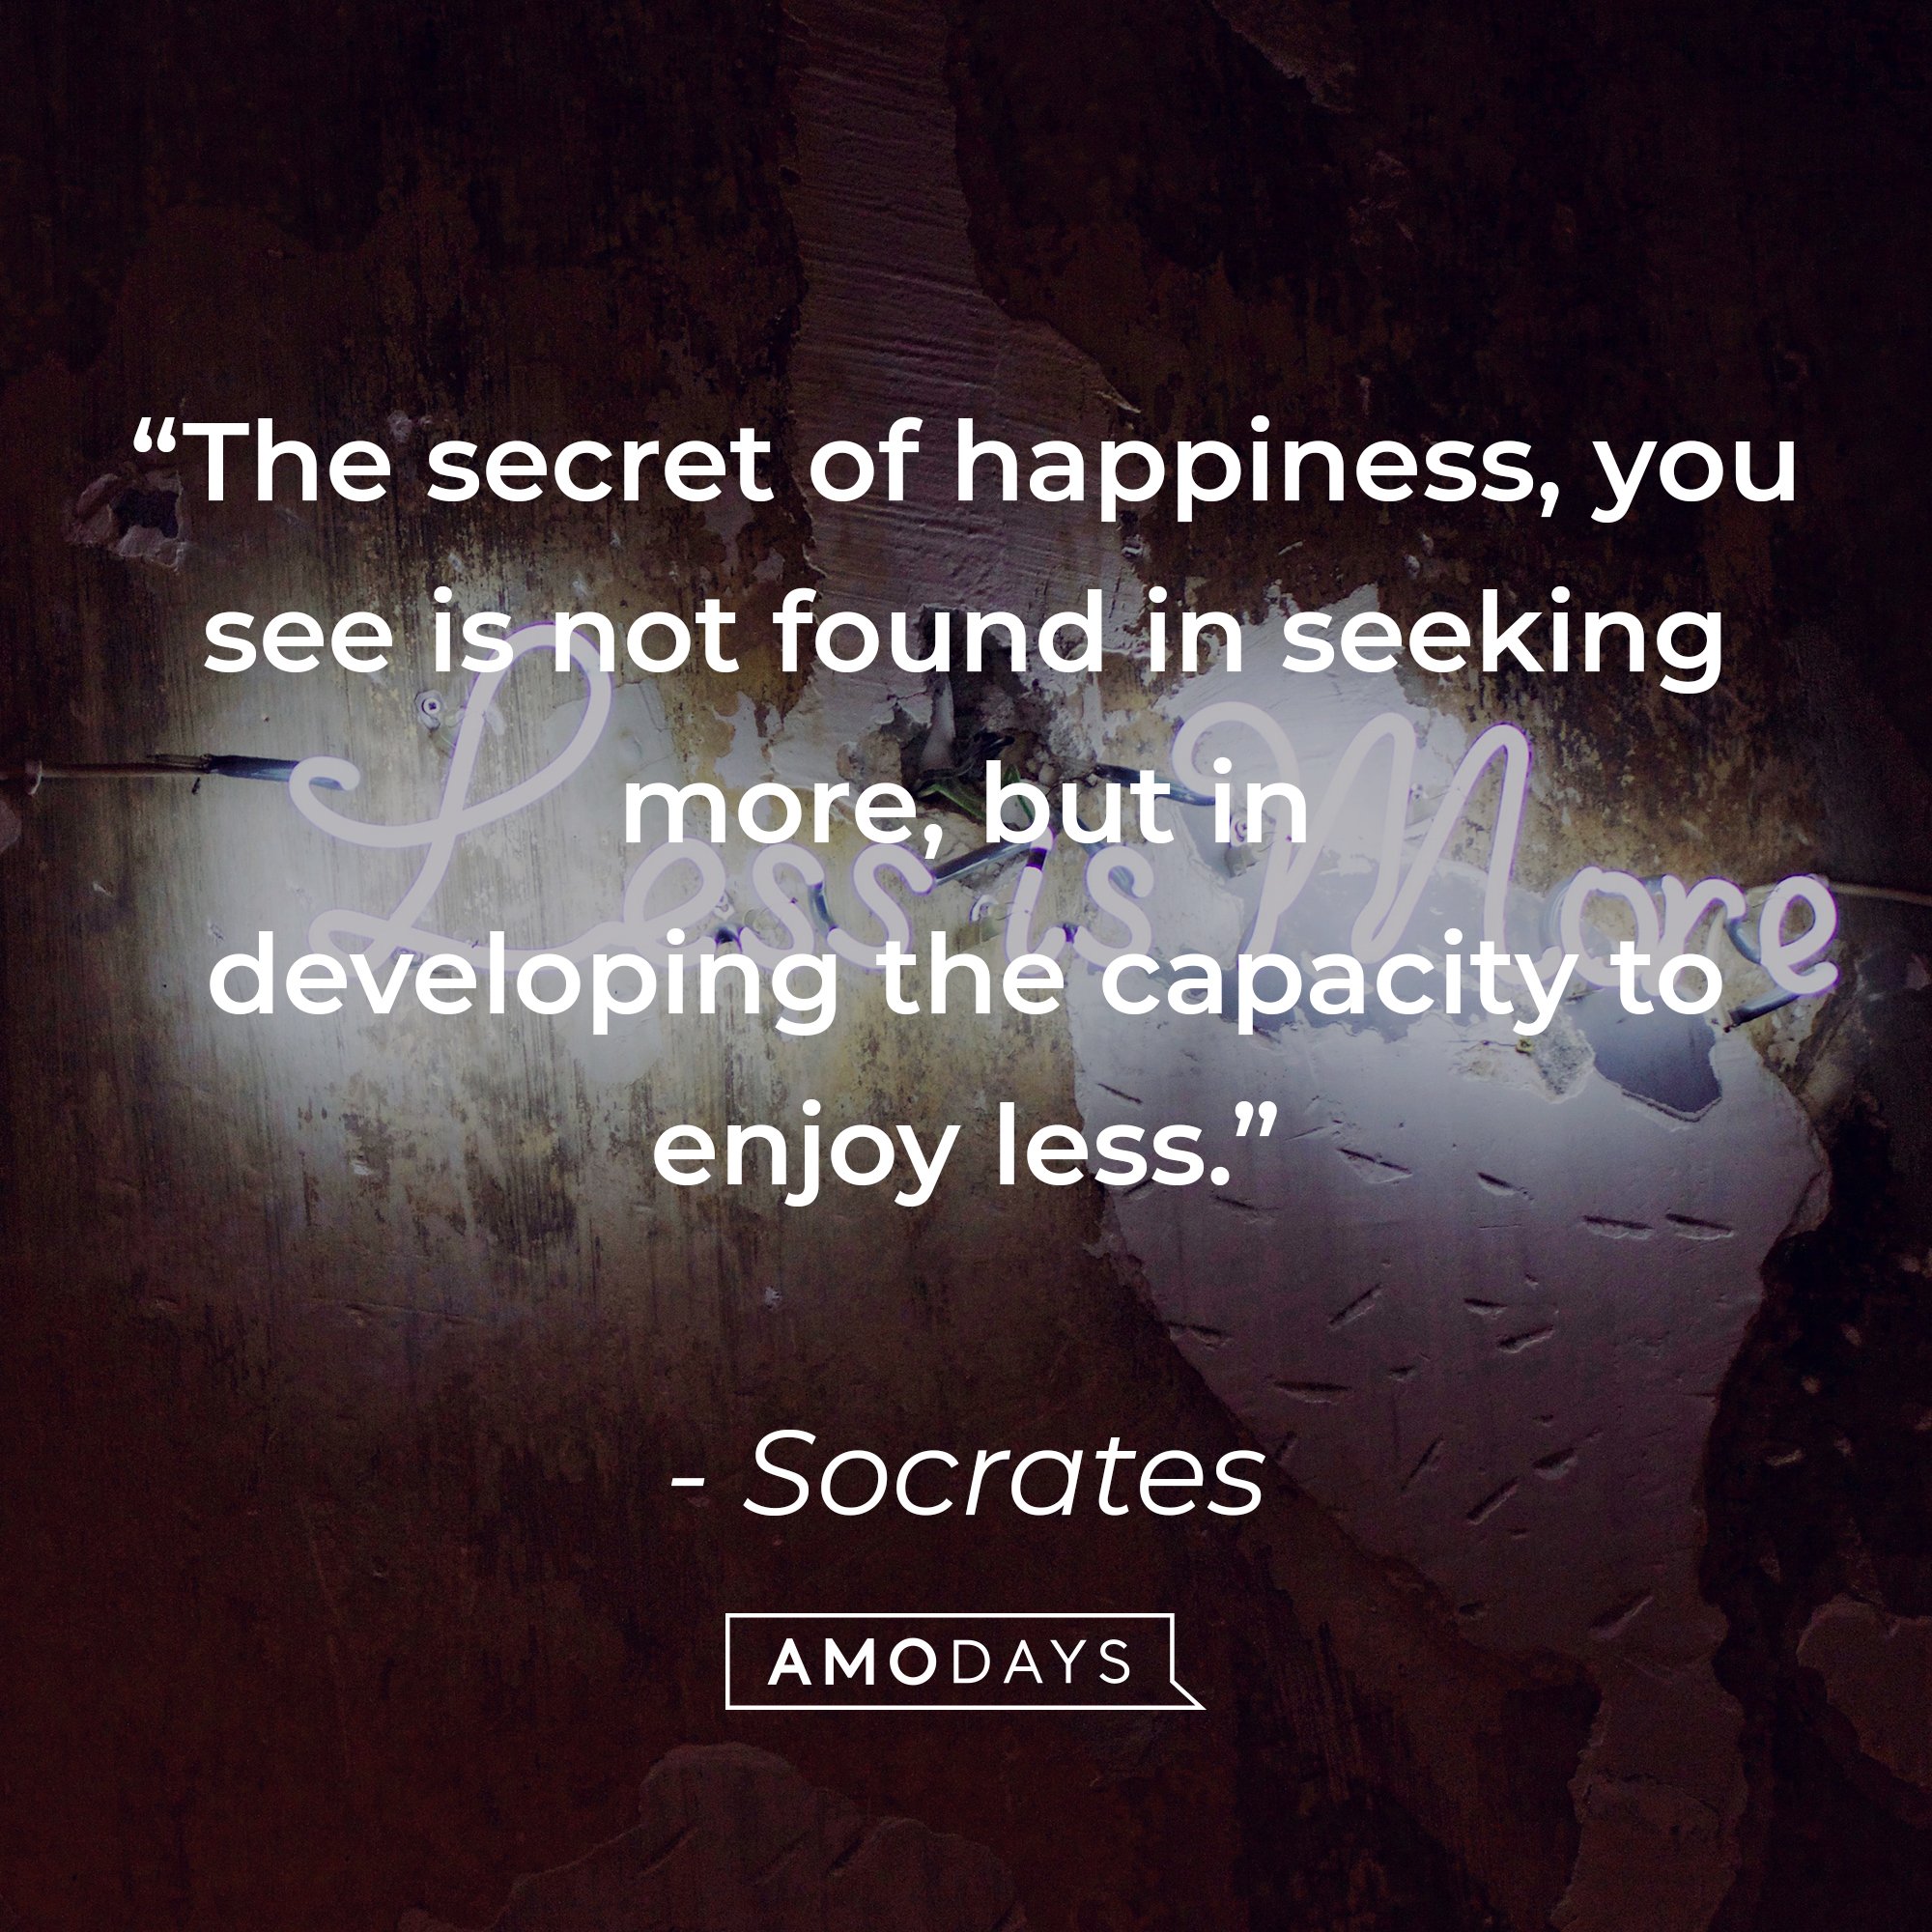 Socrates quote: “The secret of happiness, you see is not found in seeking more, but in developing the capacity to enjoy less.” | Image: Amodays